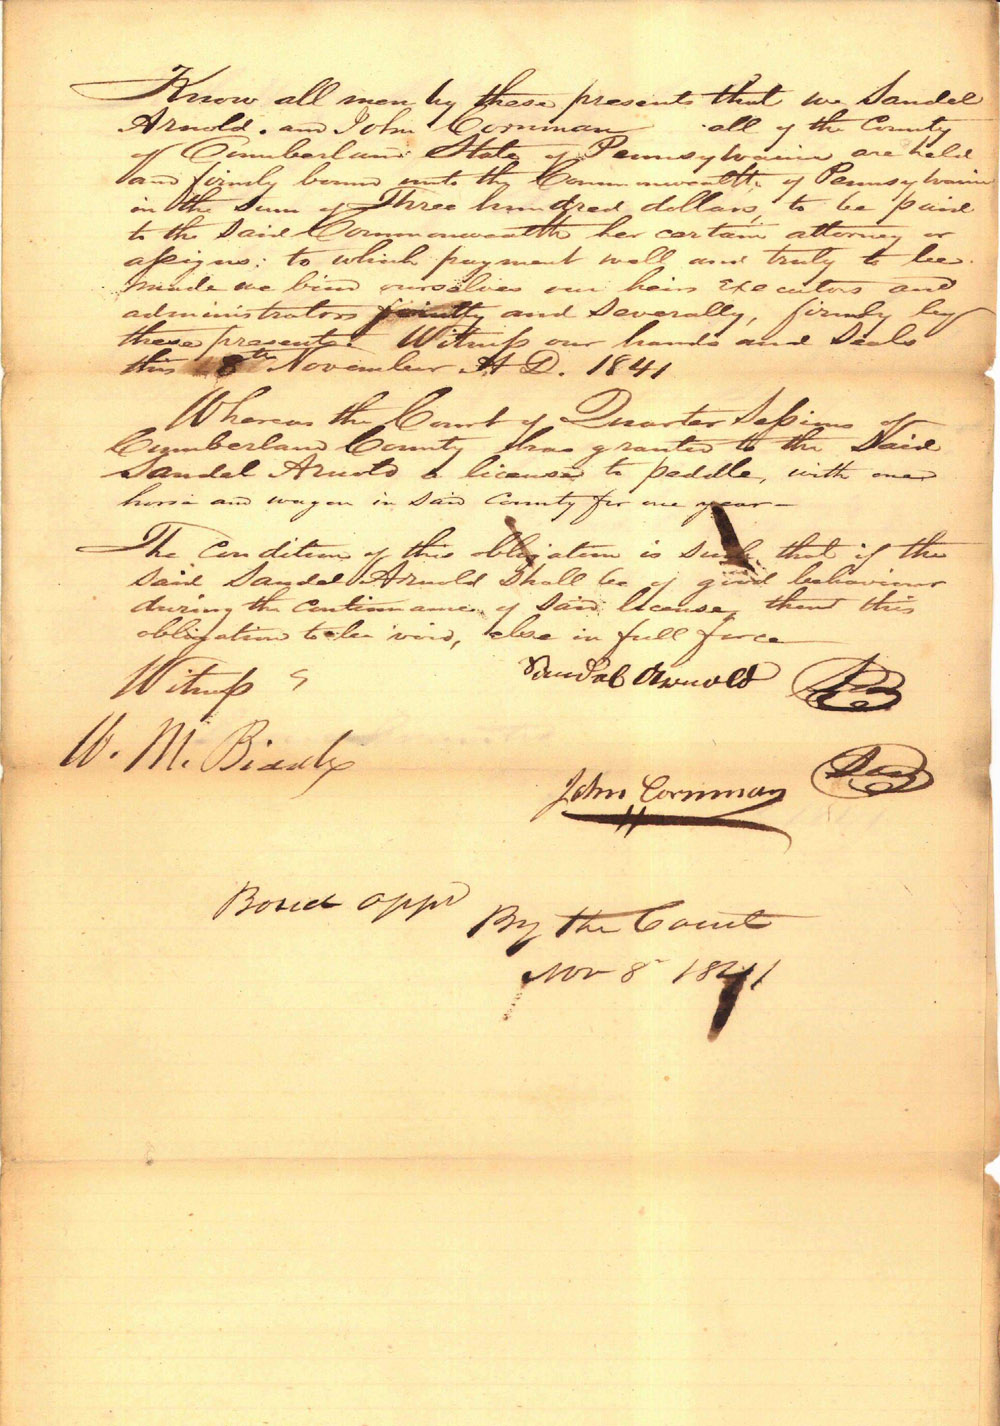 Scan of the fourth page of the Peddler's license issued to Sandel Arnold